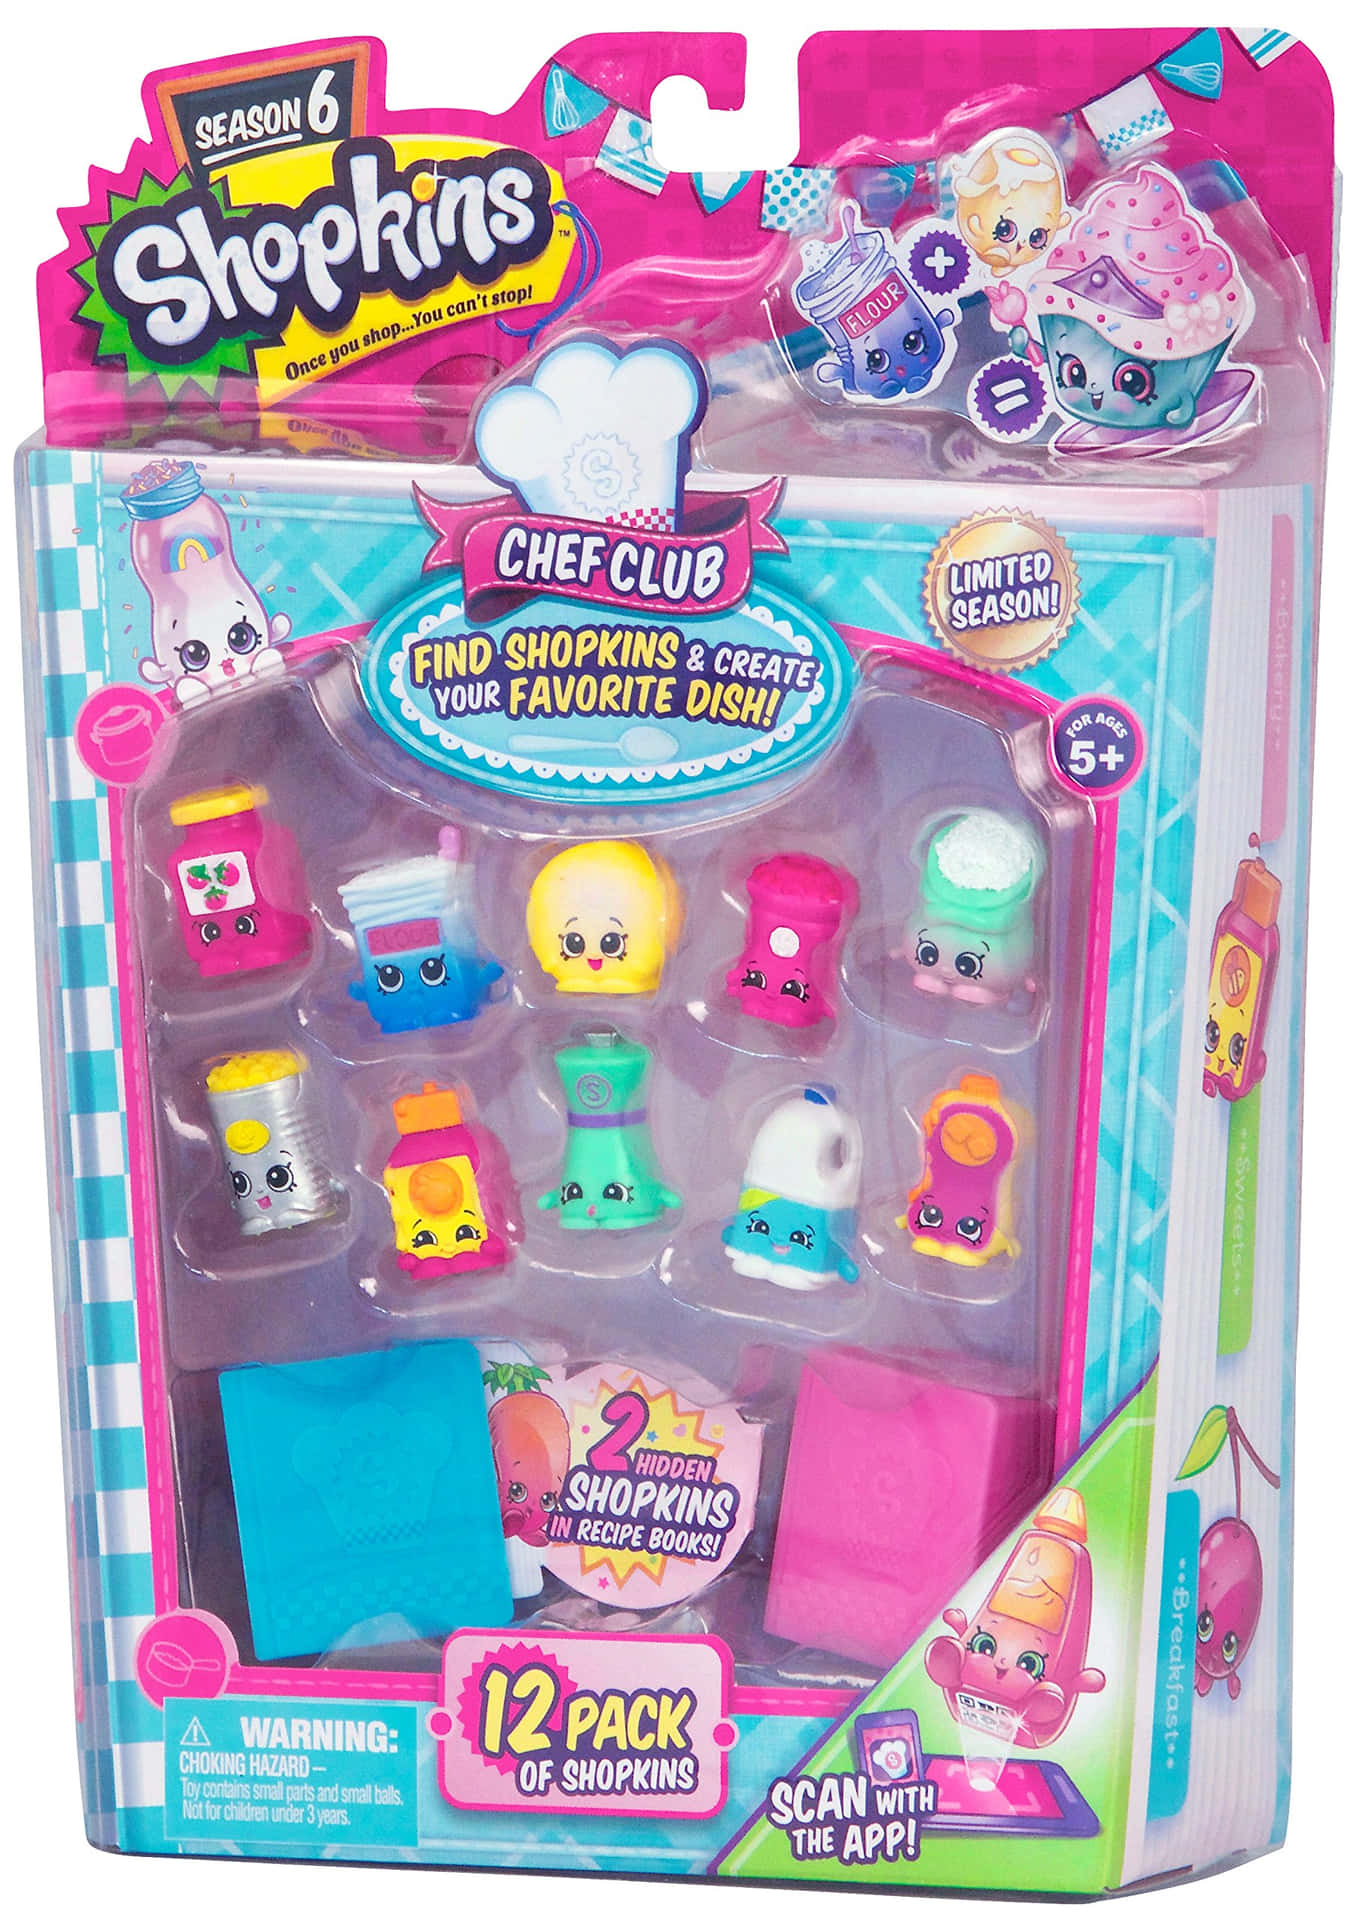 Colorful Shopkins Characters Galore